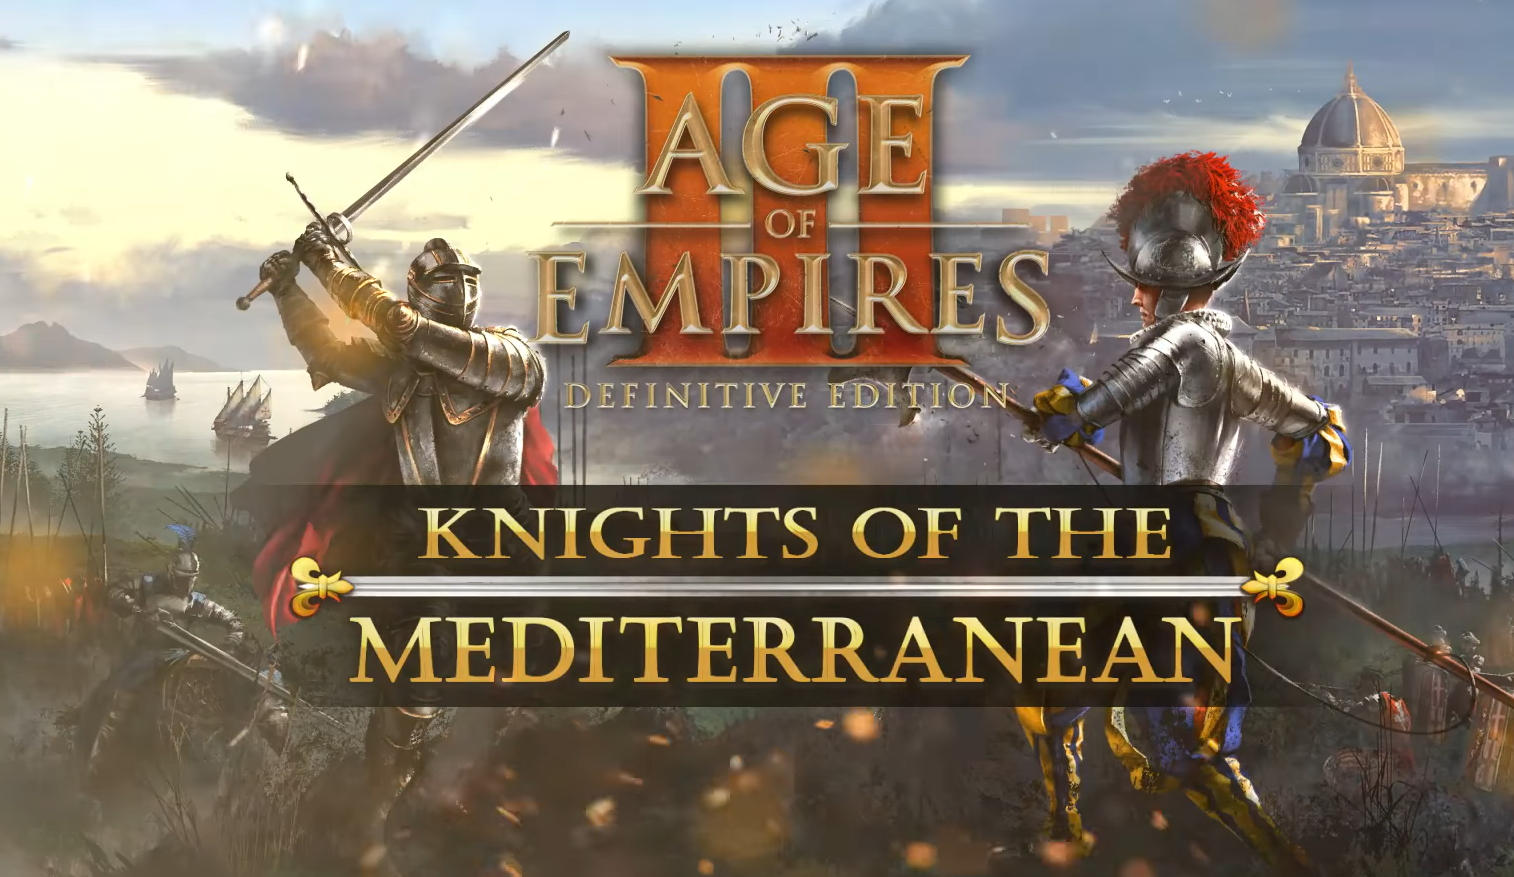 age of empires 3 definitive edition knights of the mediterranean download